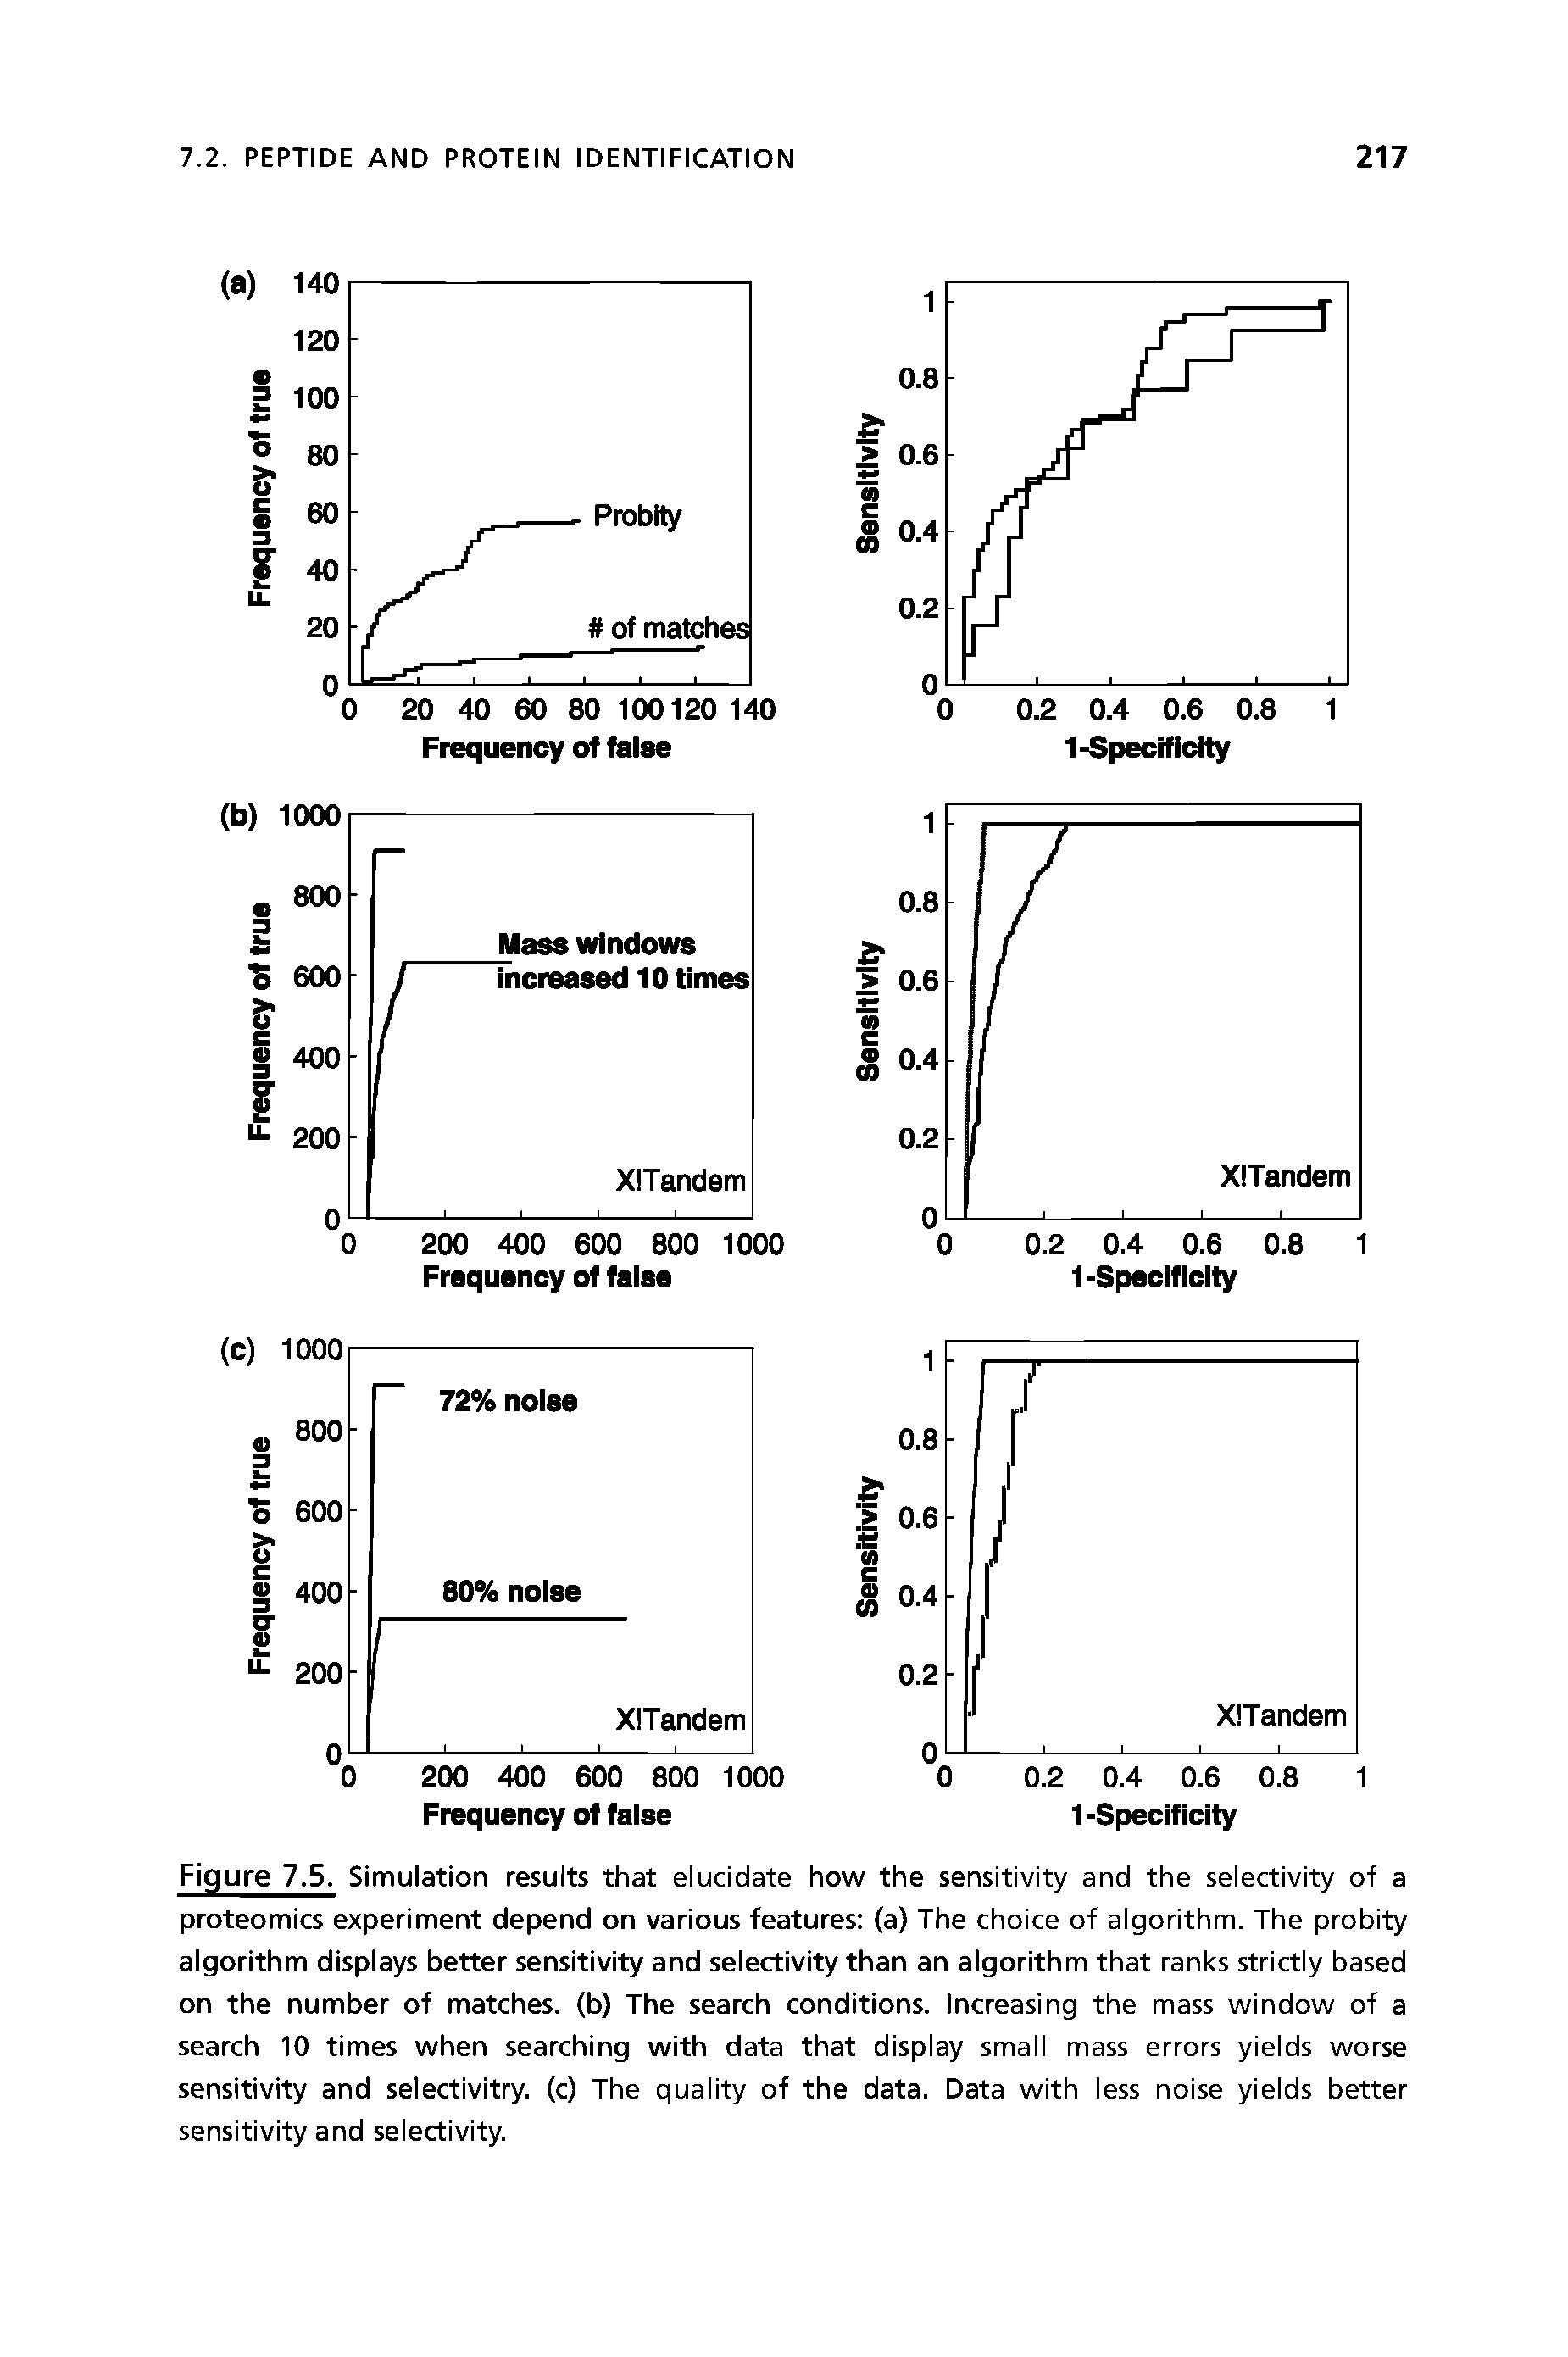 Figure 7.5. Simulation results that elucidate how the sensitivity and the selectivity of a proteomics experiment depend on various features (a) The choice of algorithm. The probity algorithm displays better sensitivity and selectivity than an algorithm that ranks strictly based on the number of matches, (b) The search conditions. Increasing the mass window of a search 10 times when searching with data that display small mass errors yields worse sensitivity and selectivitry. (c) The quality of the data. Data with less noise yields better sensitivity and selectivity.